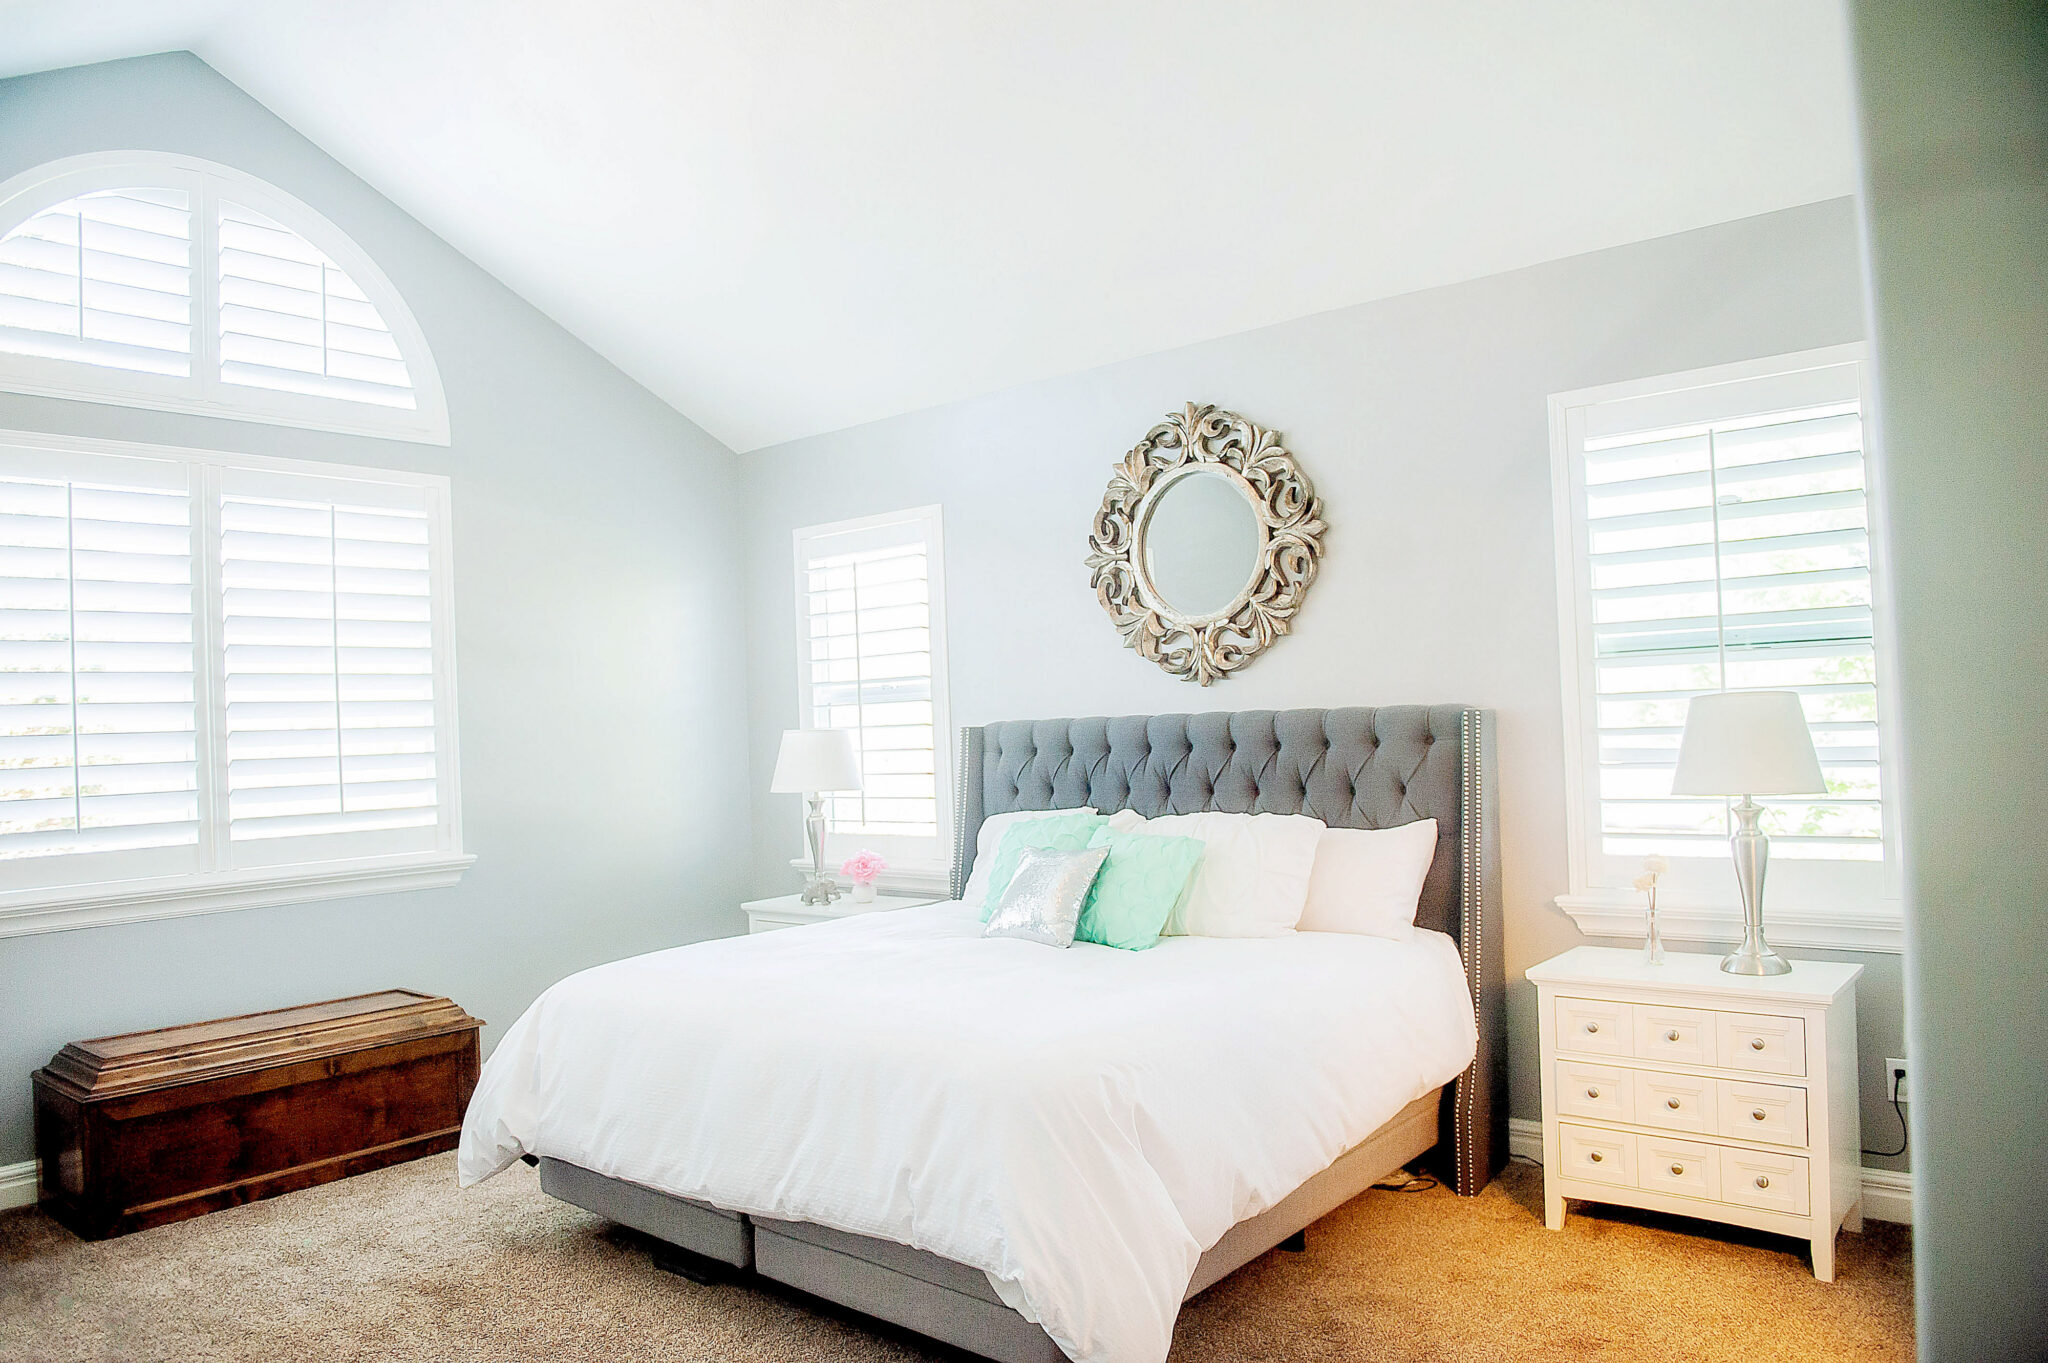 White Composite shutters with Tilt bar in a bedroom with an arched window